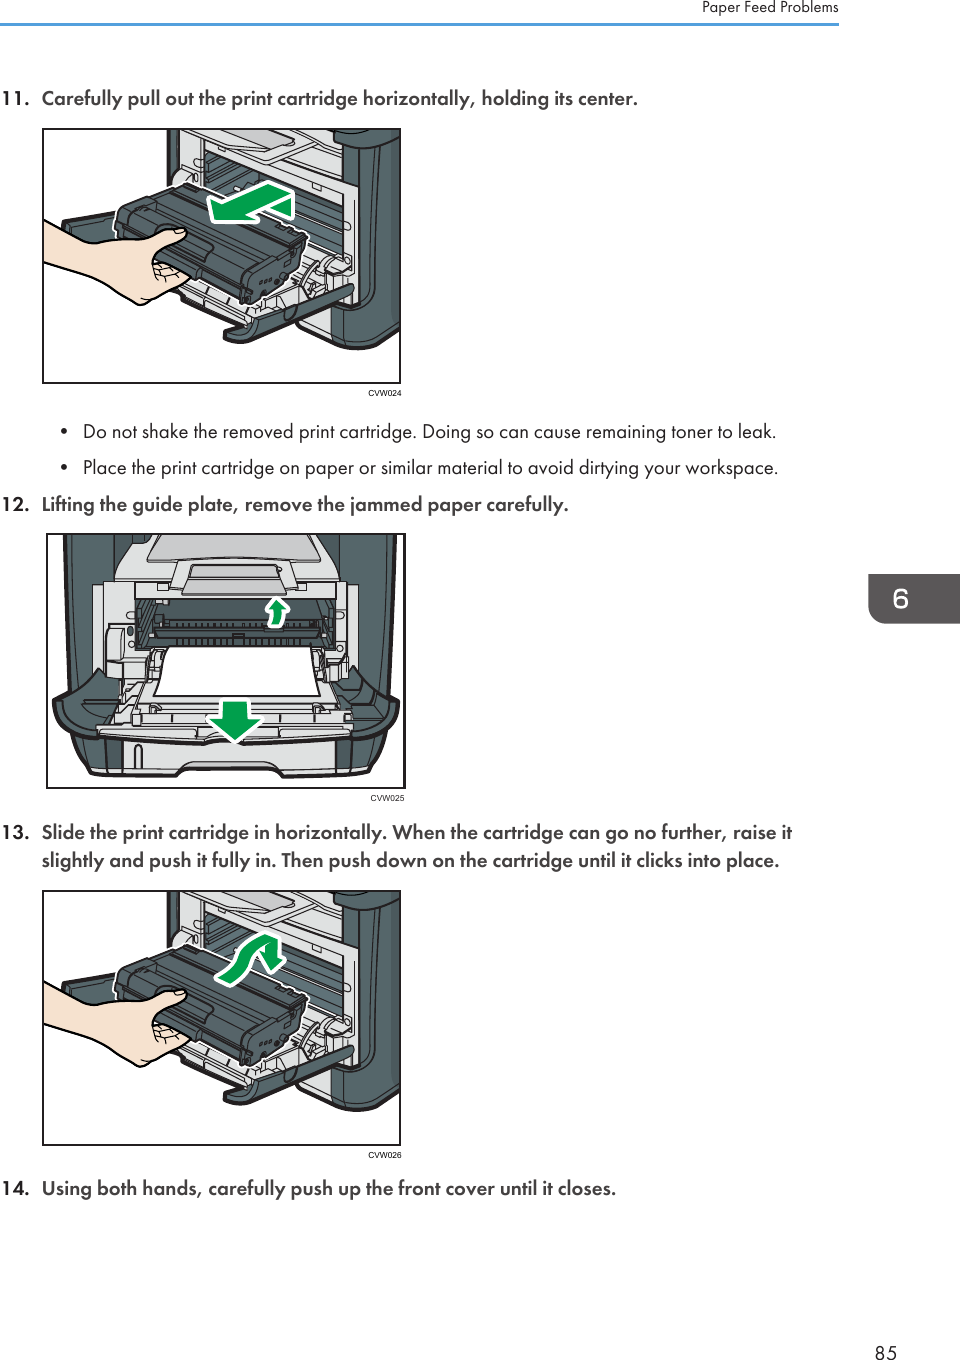 11. Carefully pull out the print cartridge horizontally, holding its center.CVW024• Do not shake the removed print cartridge. Doing so can cause remaining toner to leak.•Place the print cartridge on paper or similar material to avoid dirtying your workspace.12. Lifting the guide plate, remove the jammed paper carefully.CVW02513. Slide the print cartridge in horizontally. When the cartridge can go no further, raise itslightly and push it fully in. Then push down on the cartridge until it clicks into place.CVW02614. Using both hands, carefully push up the front cover until it closes.Paper Feed Problems85